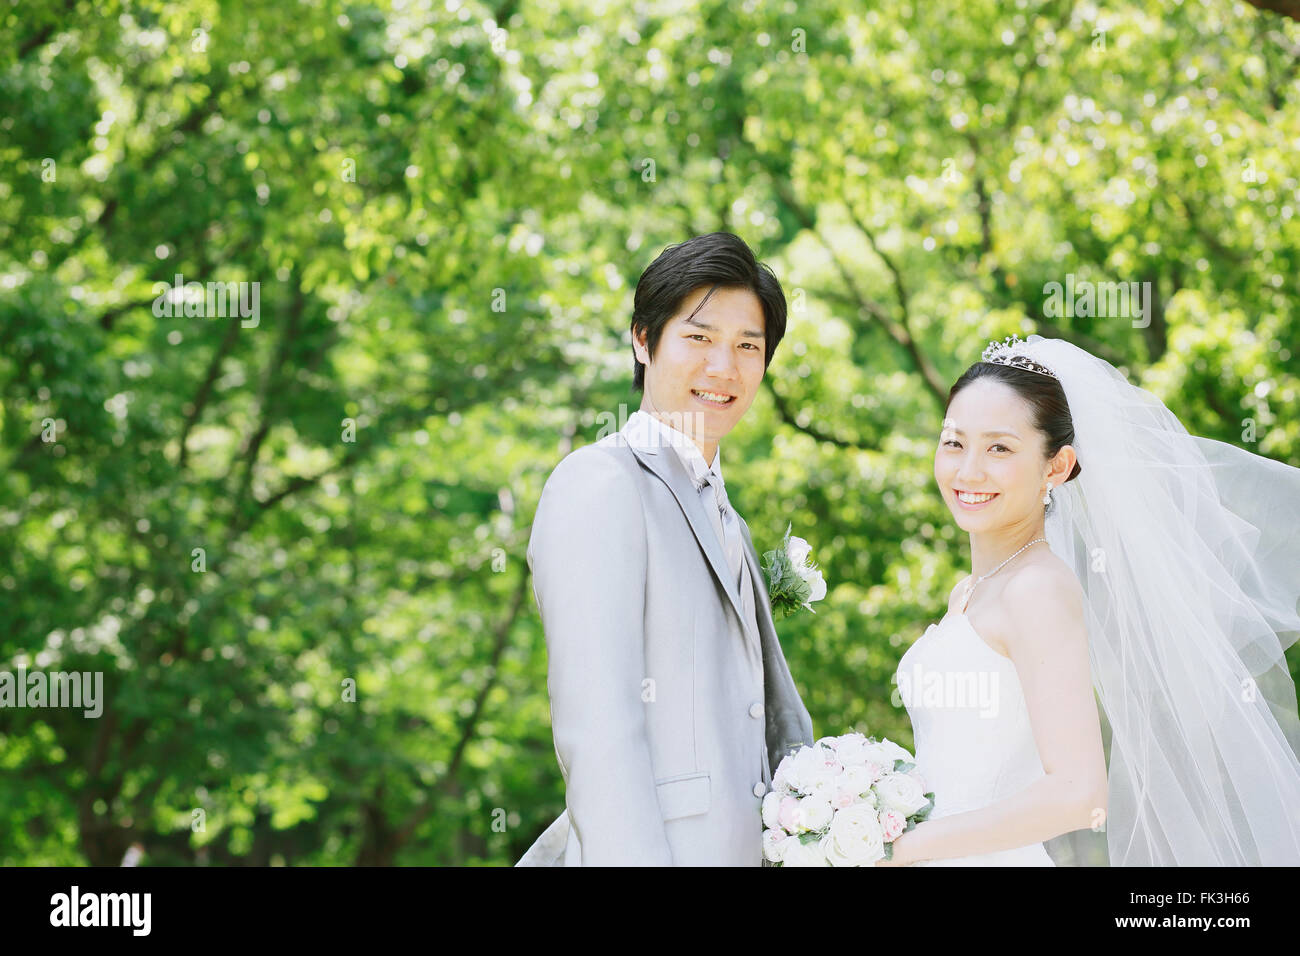 Japanese bride and groom in a city park Stock Photo - Alamy